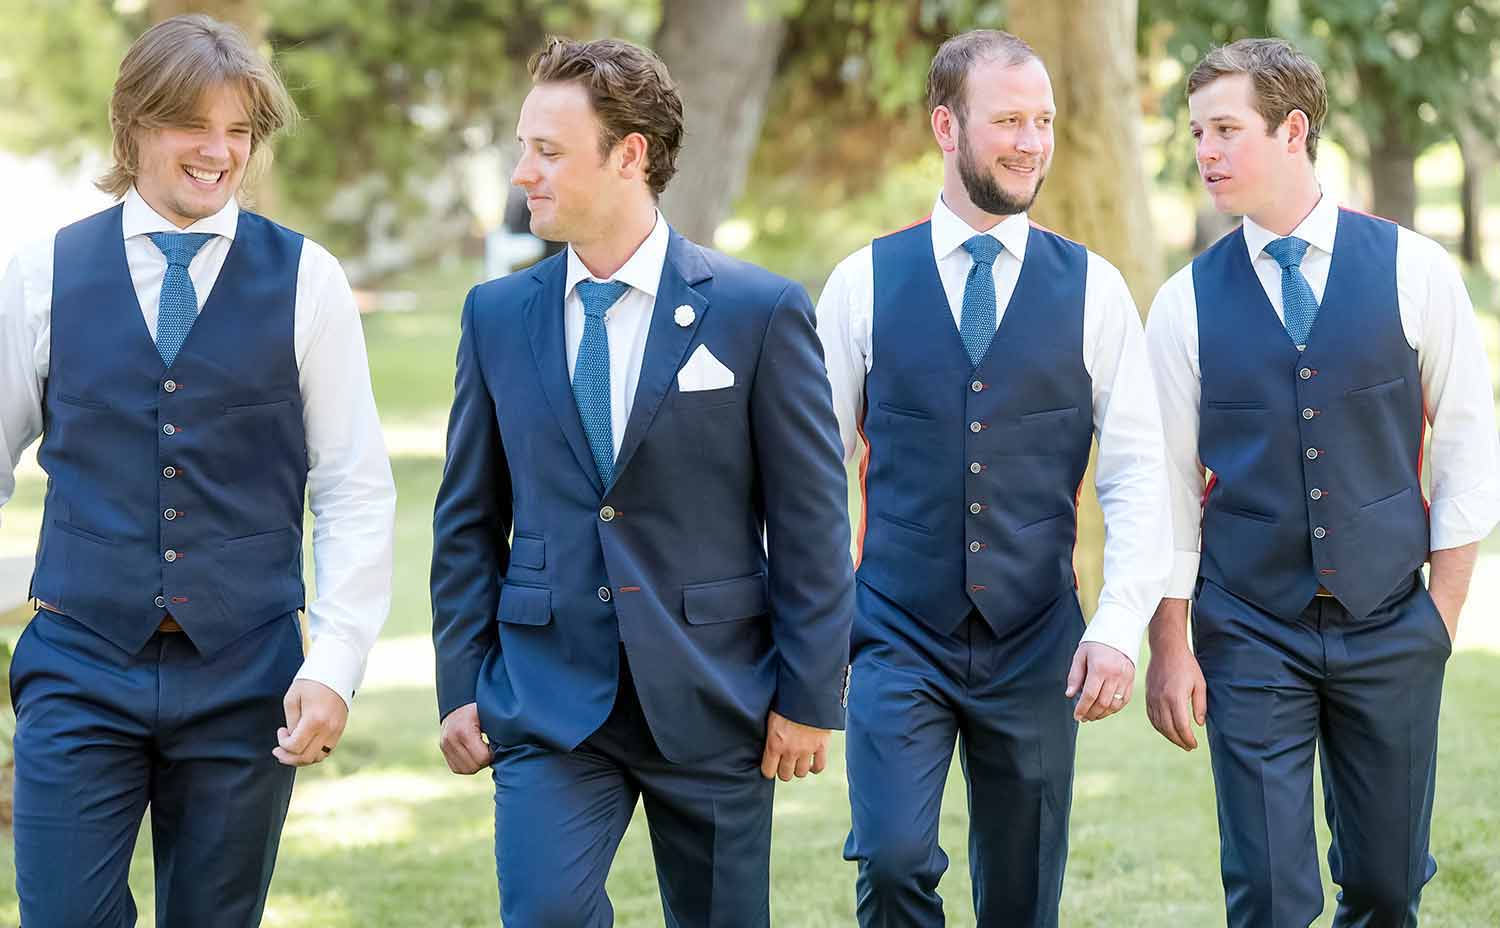 A groom with his groomsmen walking together